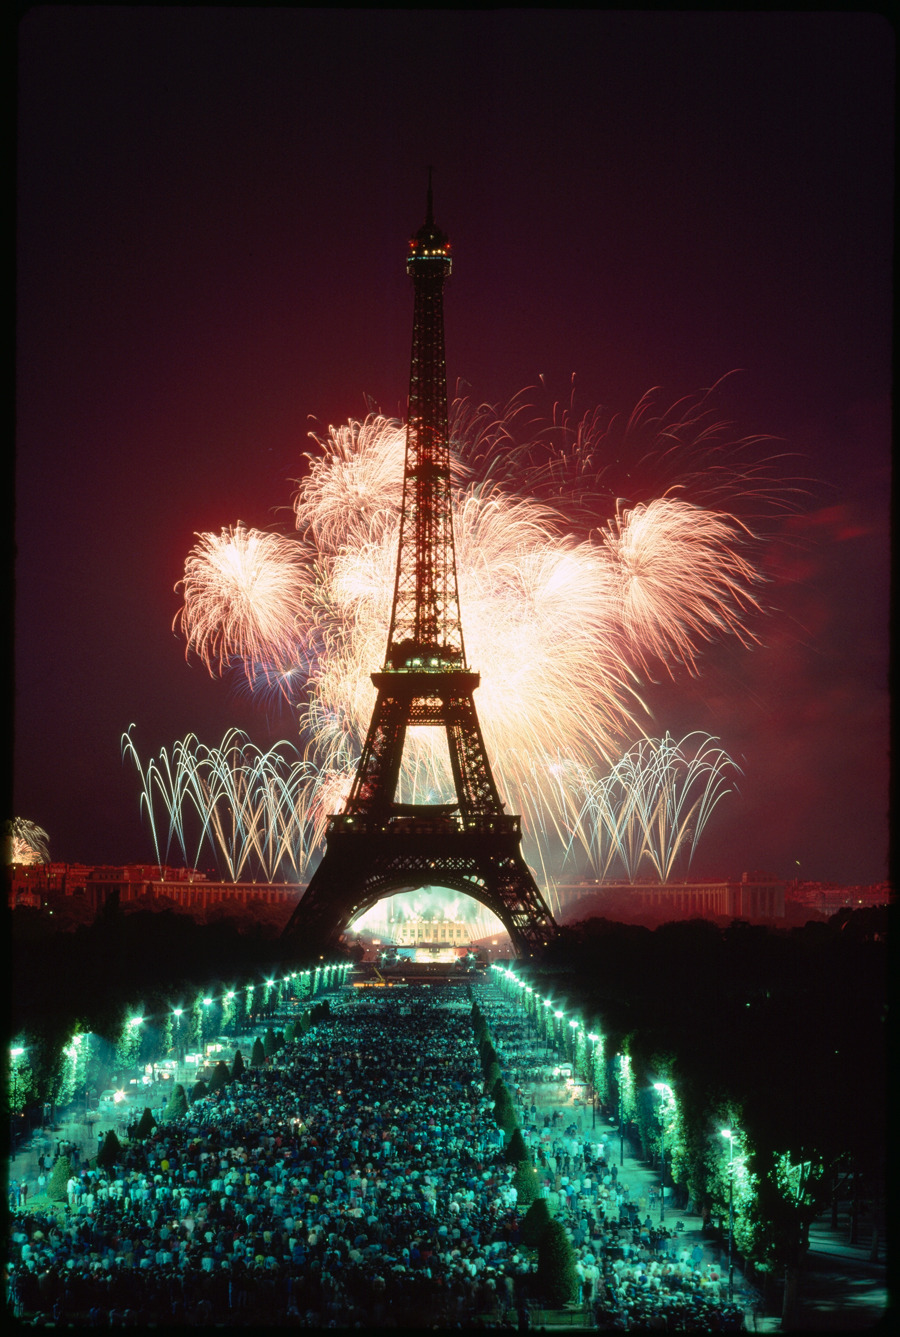 A fireworks display illuminates the Eiffel Tower.This photograph appeared on the cover of the July 1989 issue.Photograph by James L. Stanfield, National Geographic